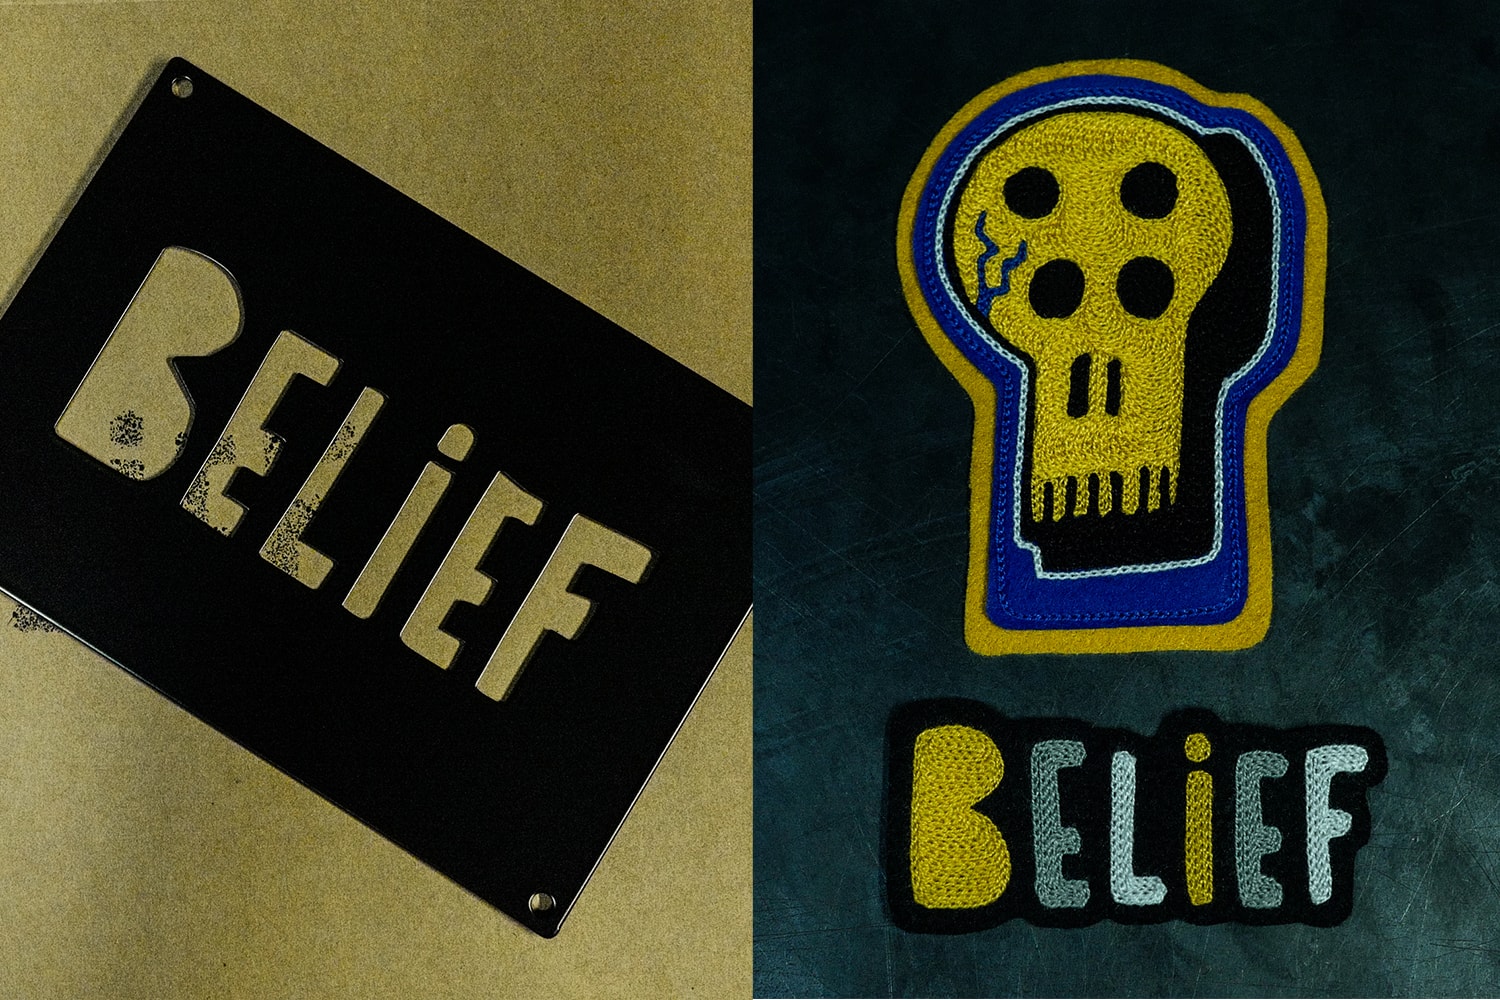 BELIEF Moscow Kirill Lebedev Exhibition Pop-Up Store Info Location Address Russia Streetwear NOTFOUND